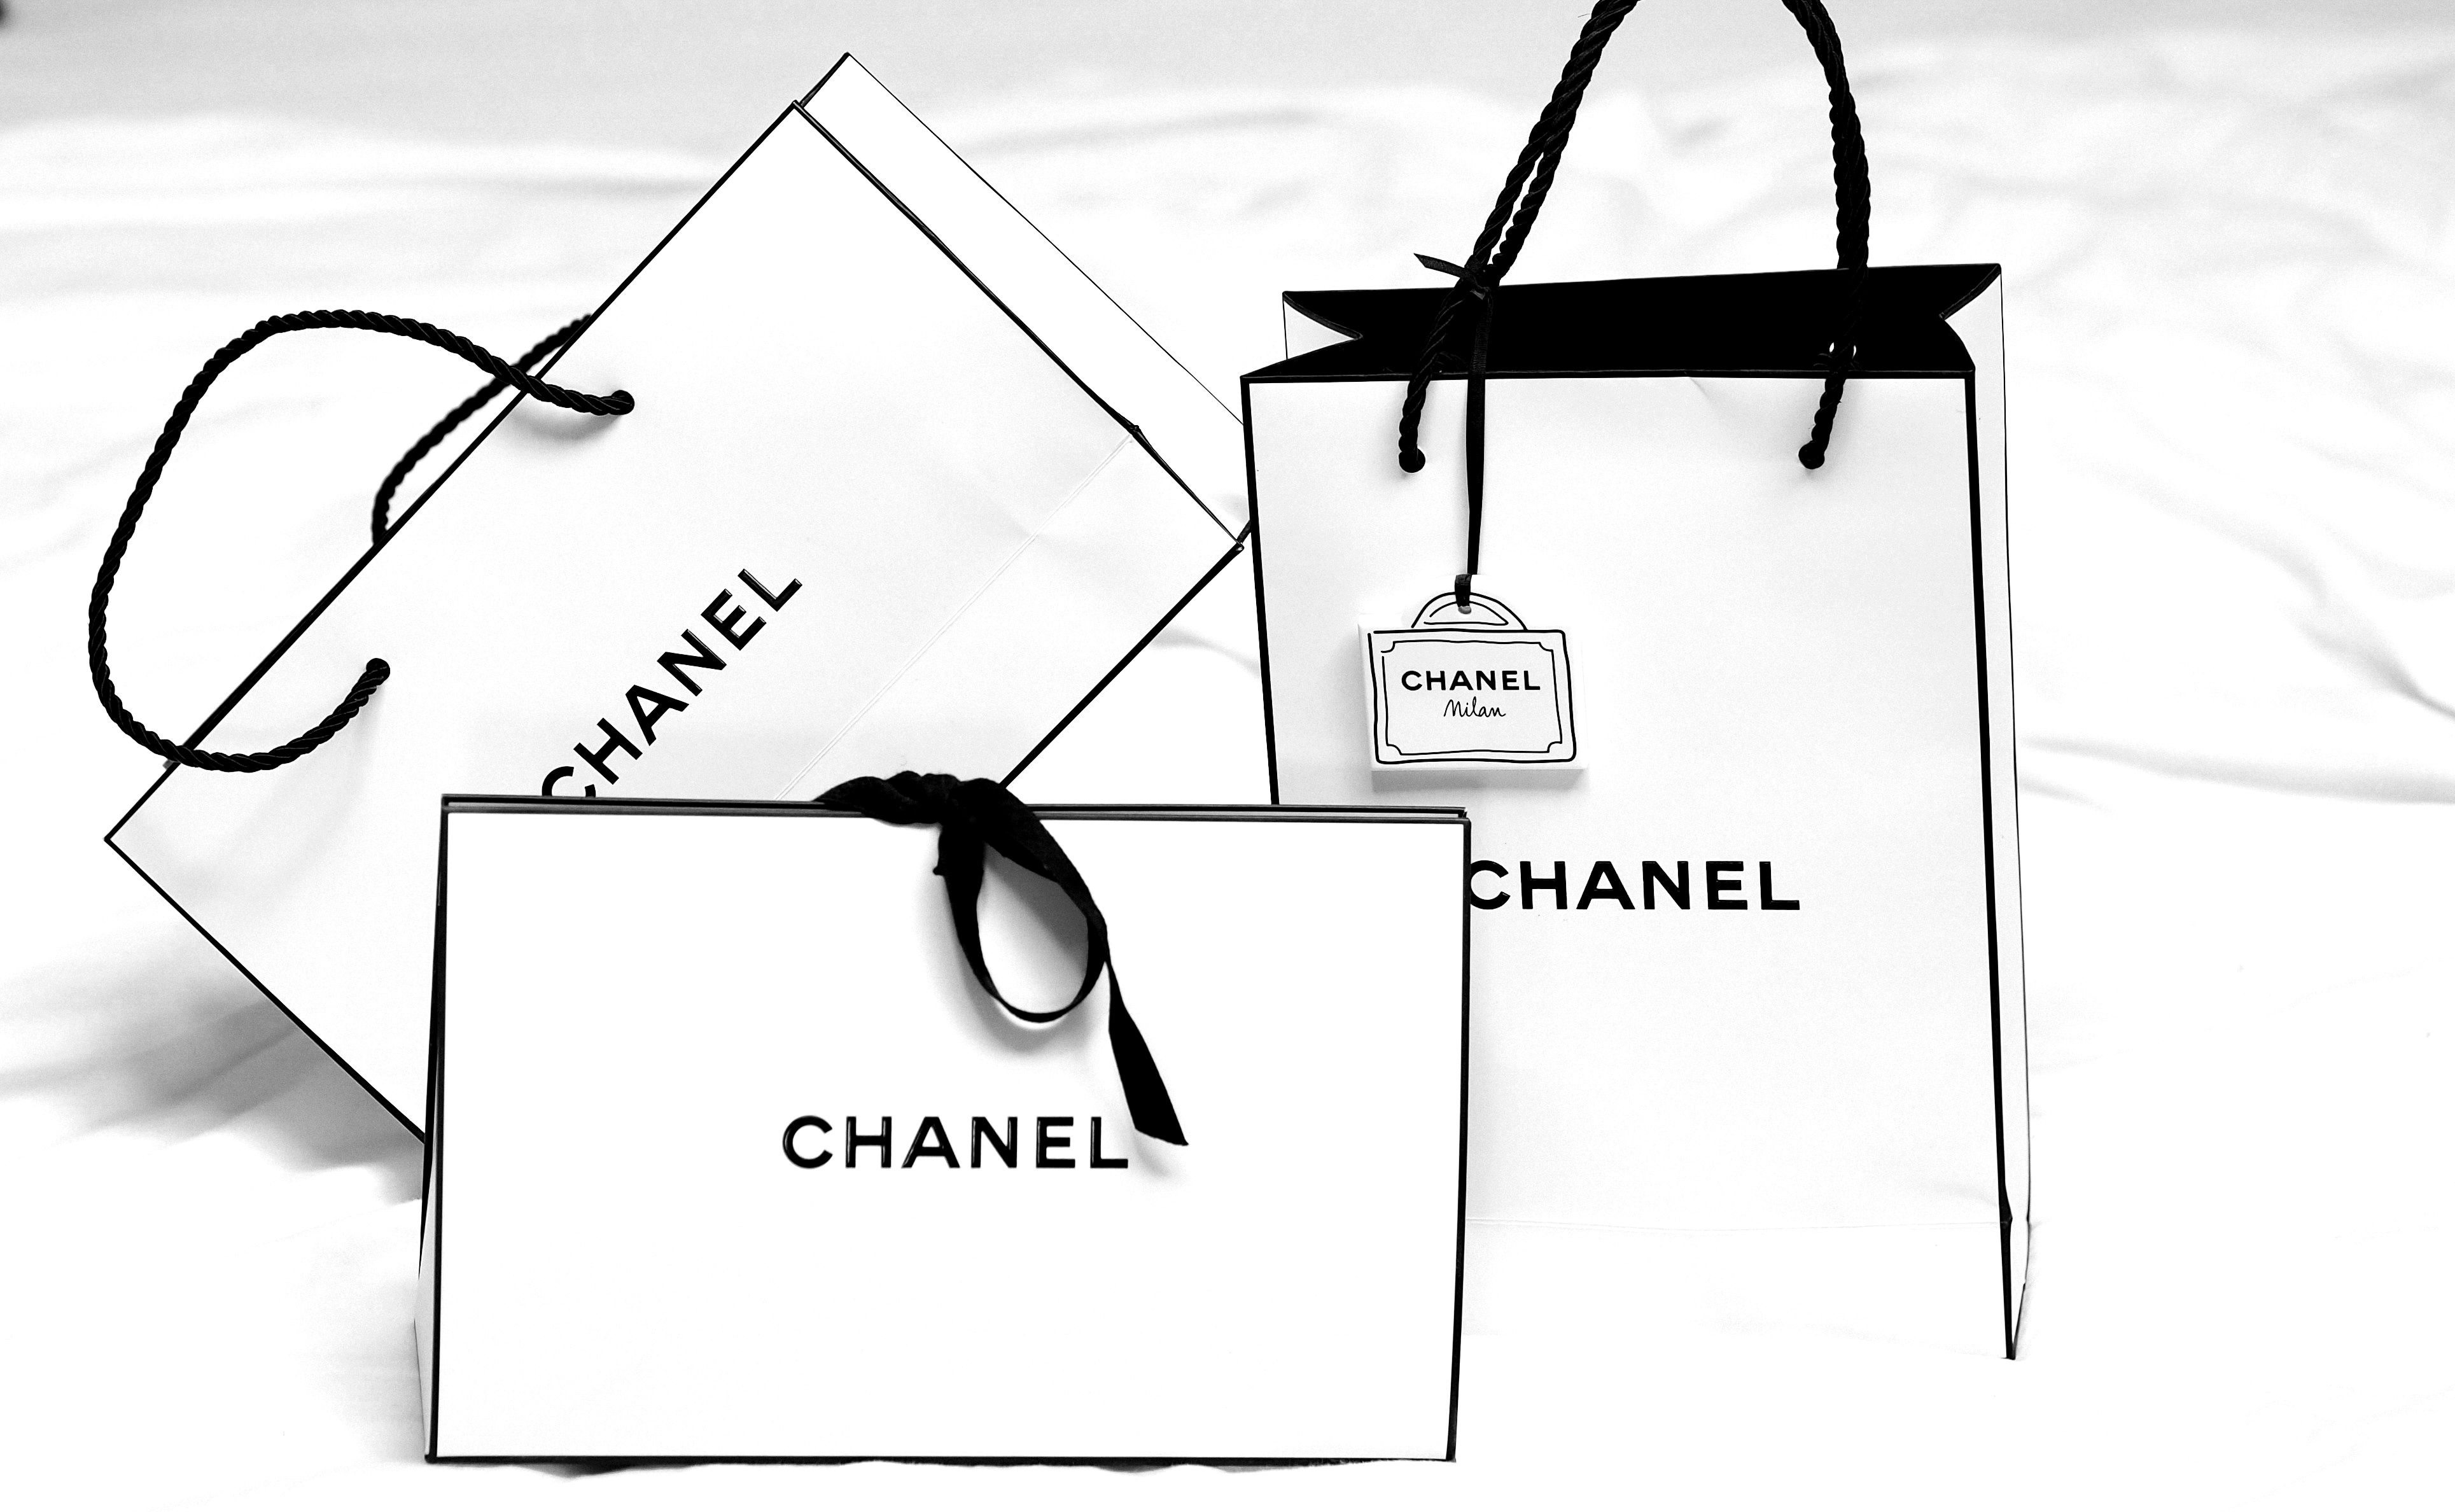 The Global Legal Post article- Quality and authenticity at issue in high-profile Chanel and WGACA case